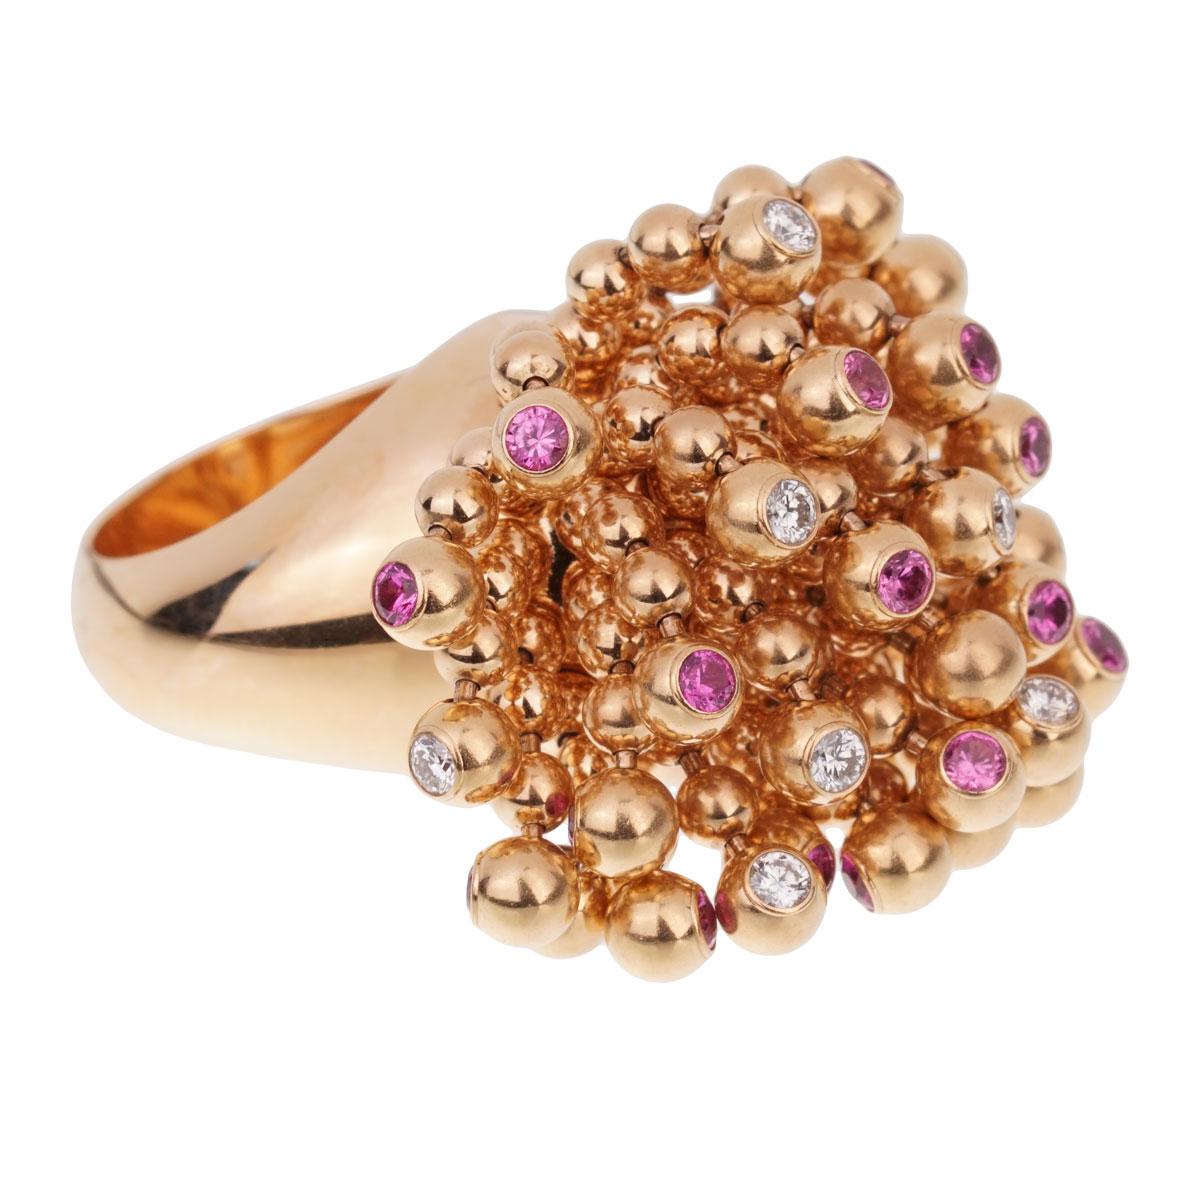 A fabulous cocktail ring by Cartier from the Paris Nouvelle Vague collection designed as bead tassels set with round brilliant cut diamonds and pink sapphires in 18k rose gold. The free flowing design of this iconic ring ensures brilliance from